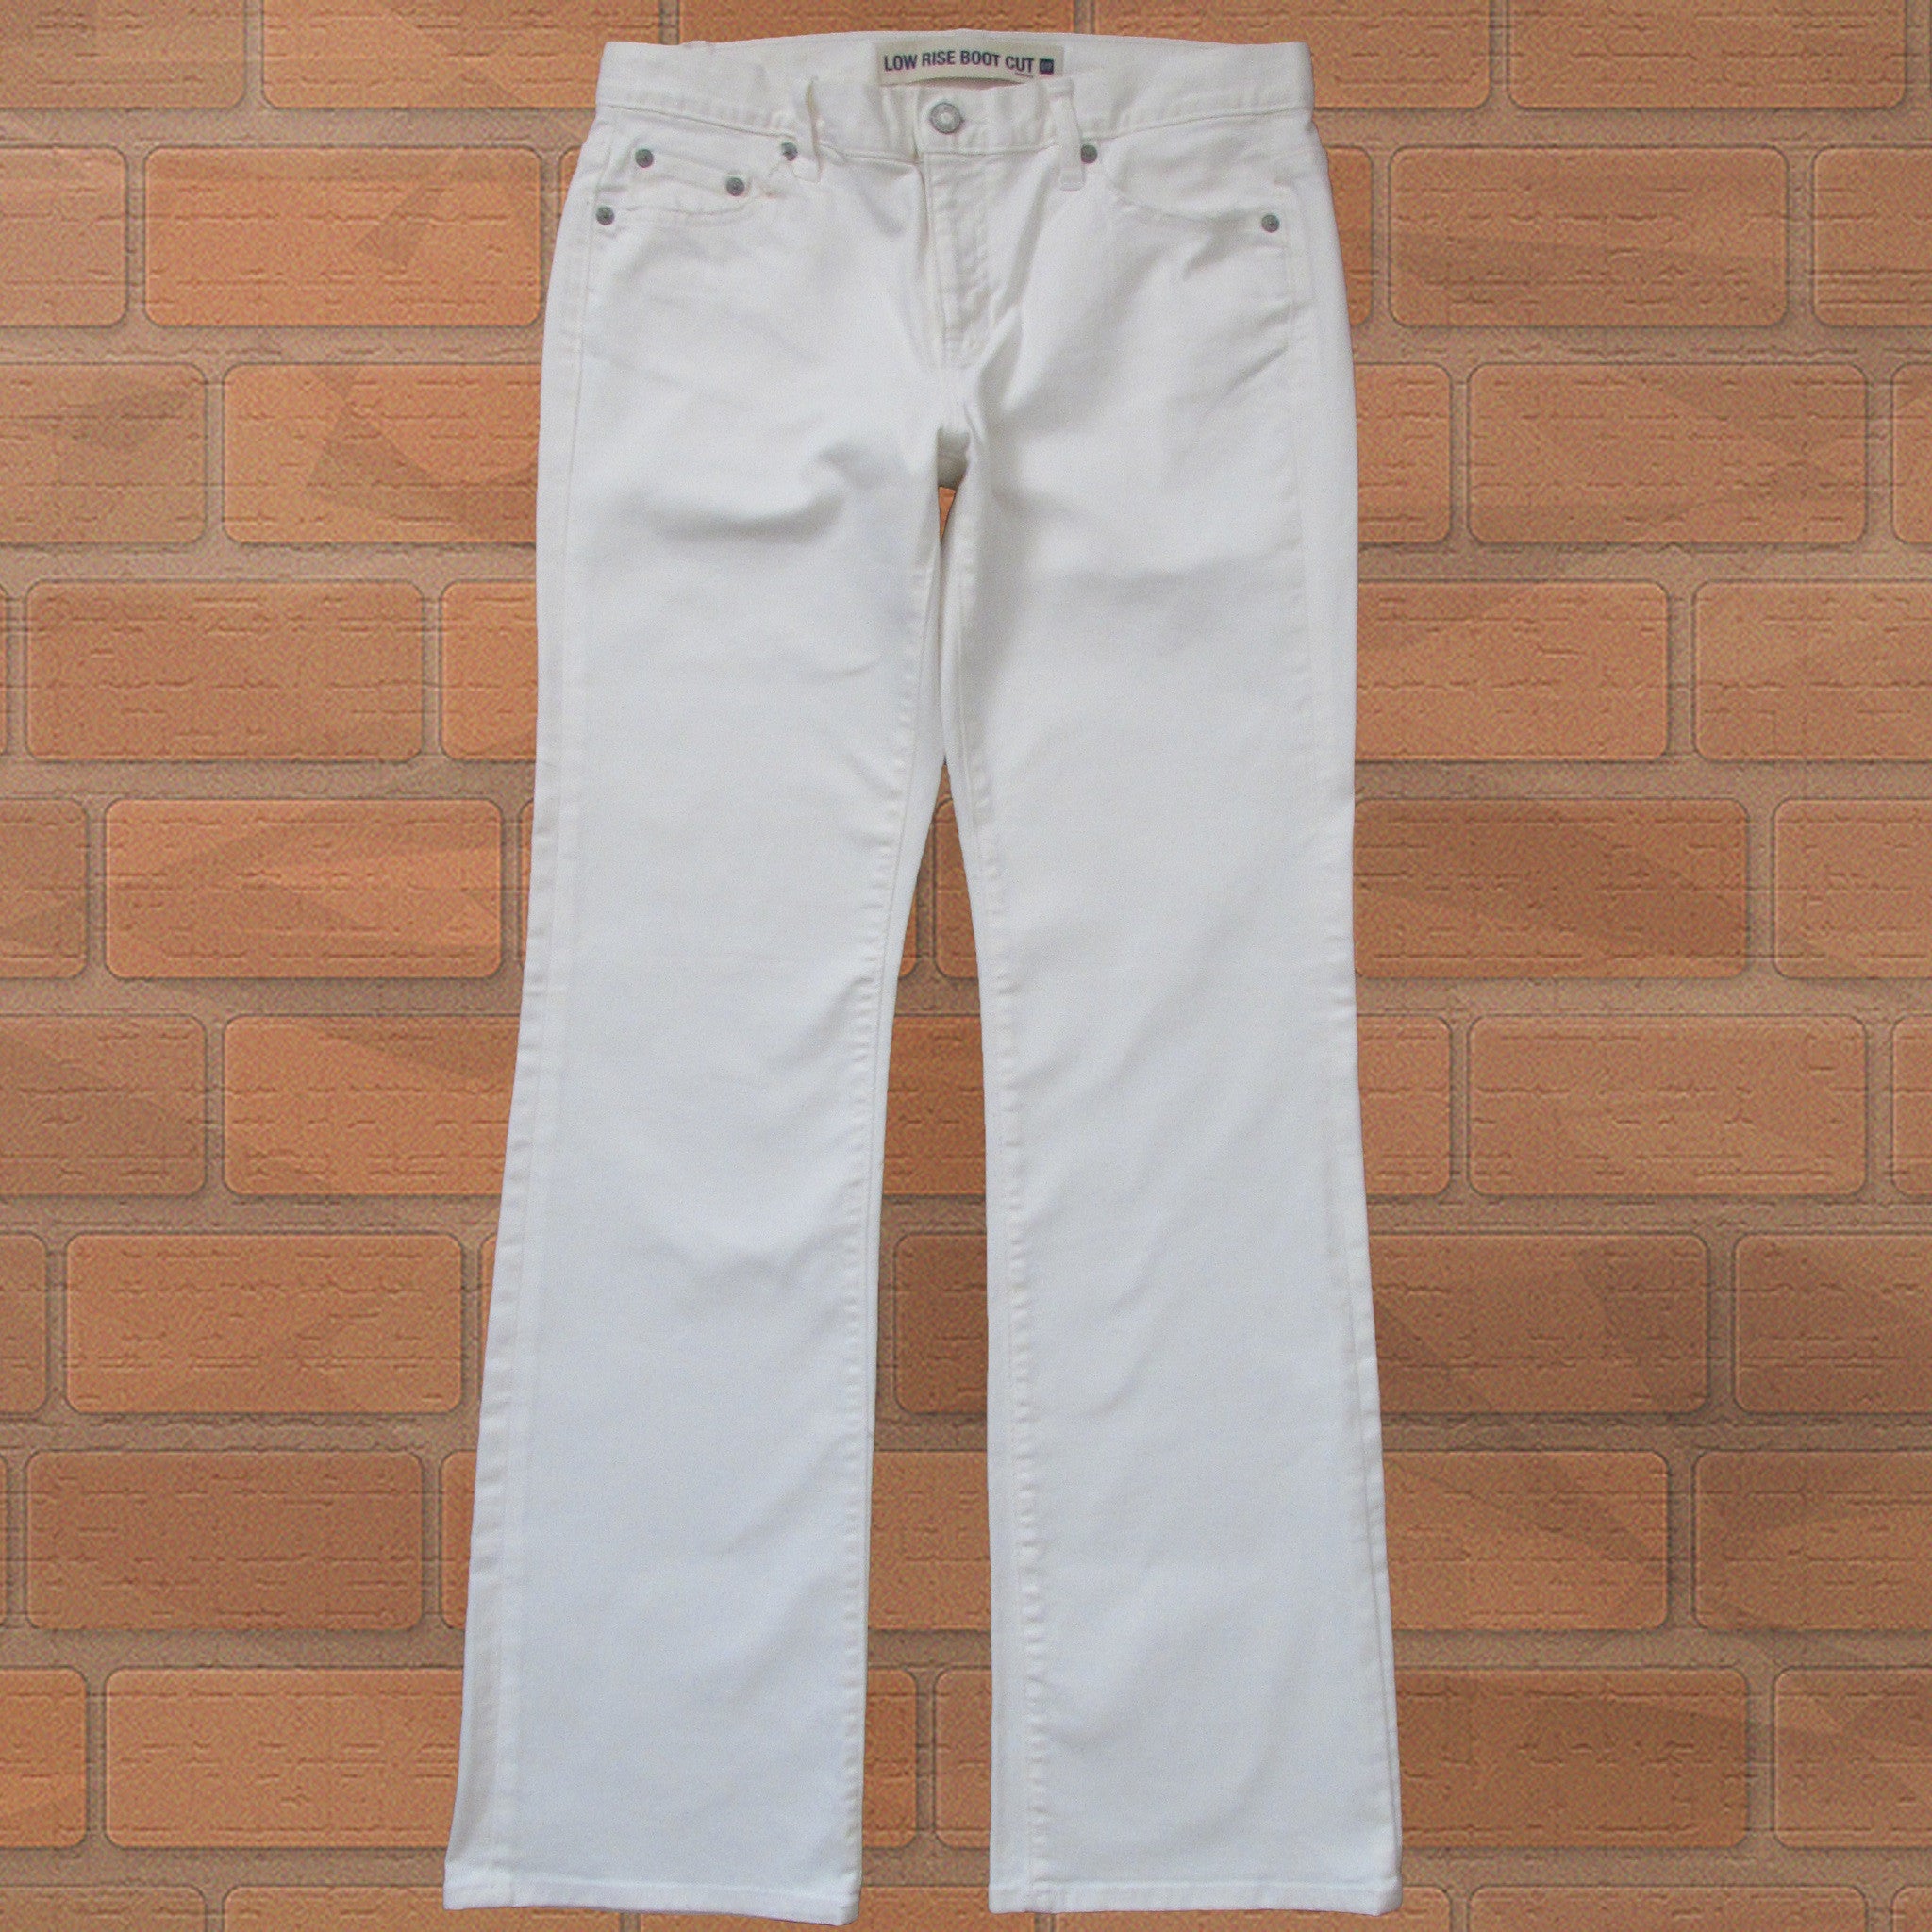 GAP Low Rise Boot Cut White Jeans Front Straight View